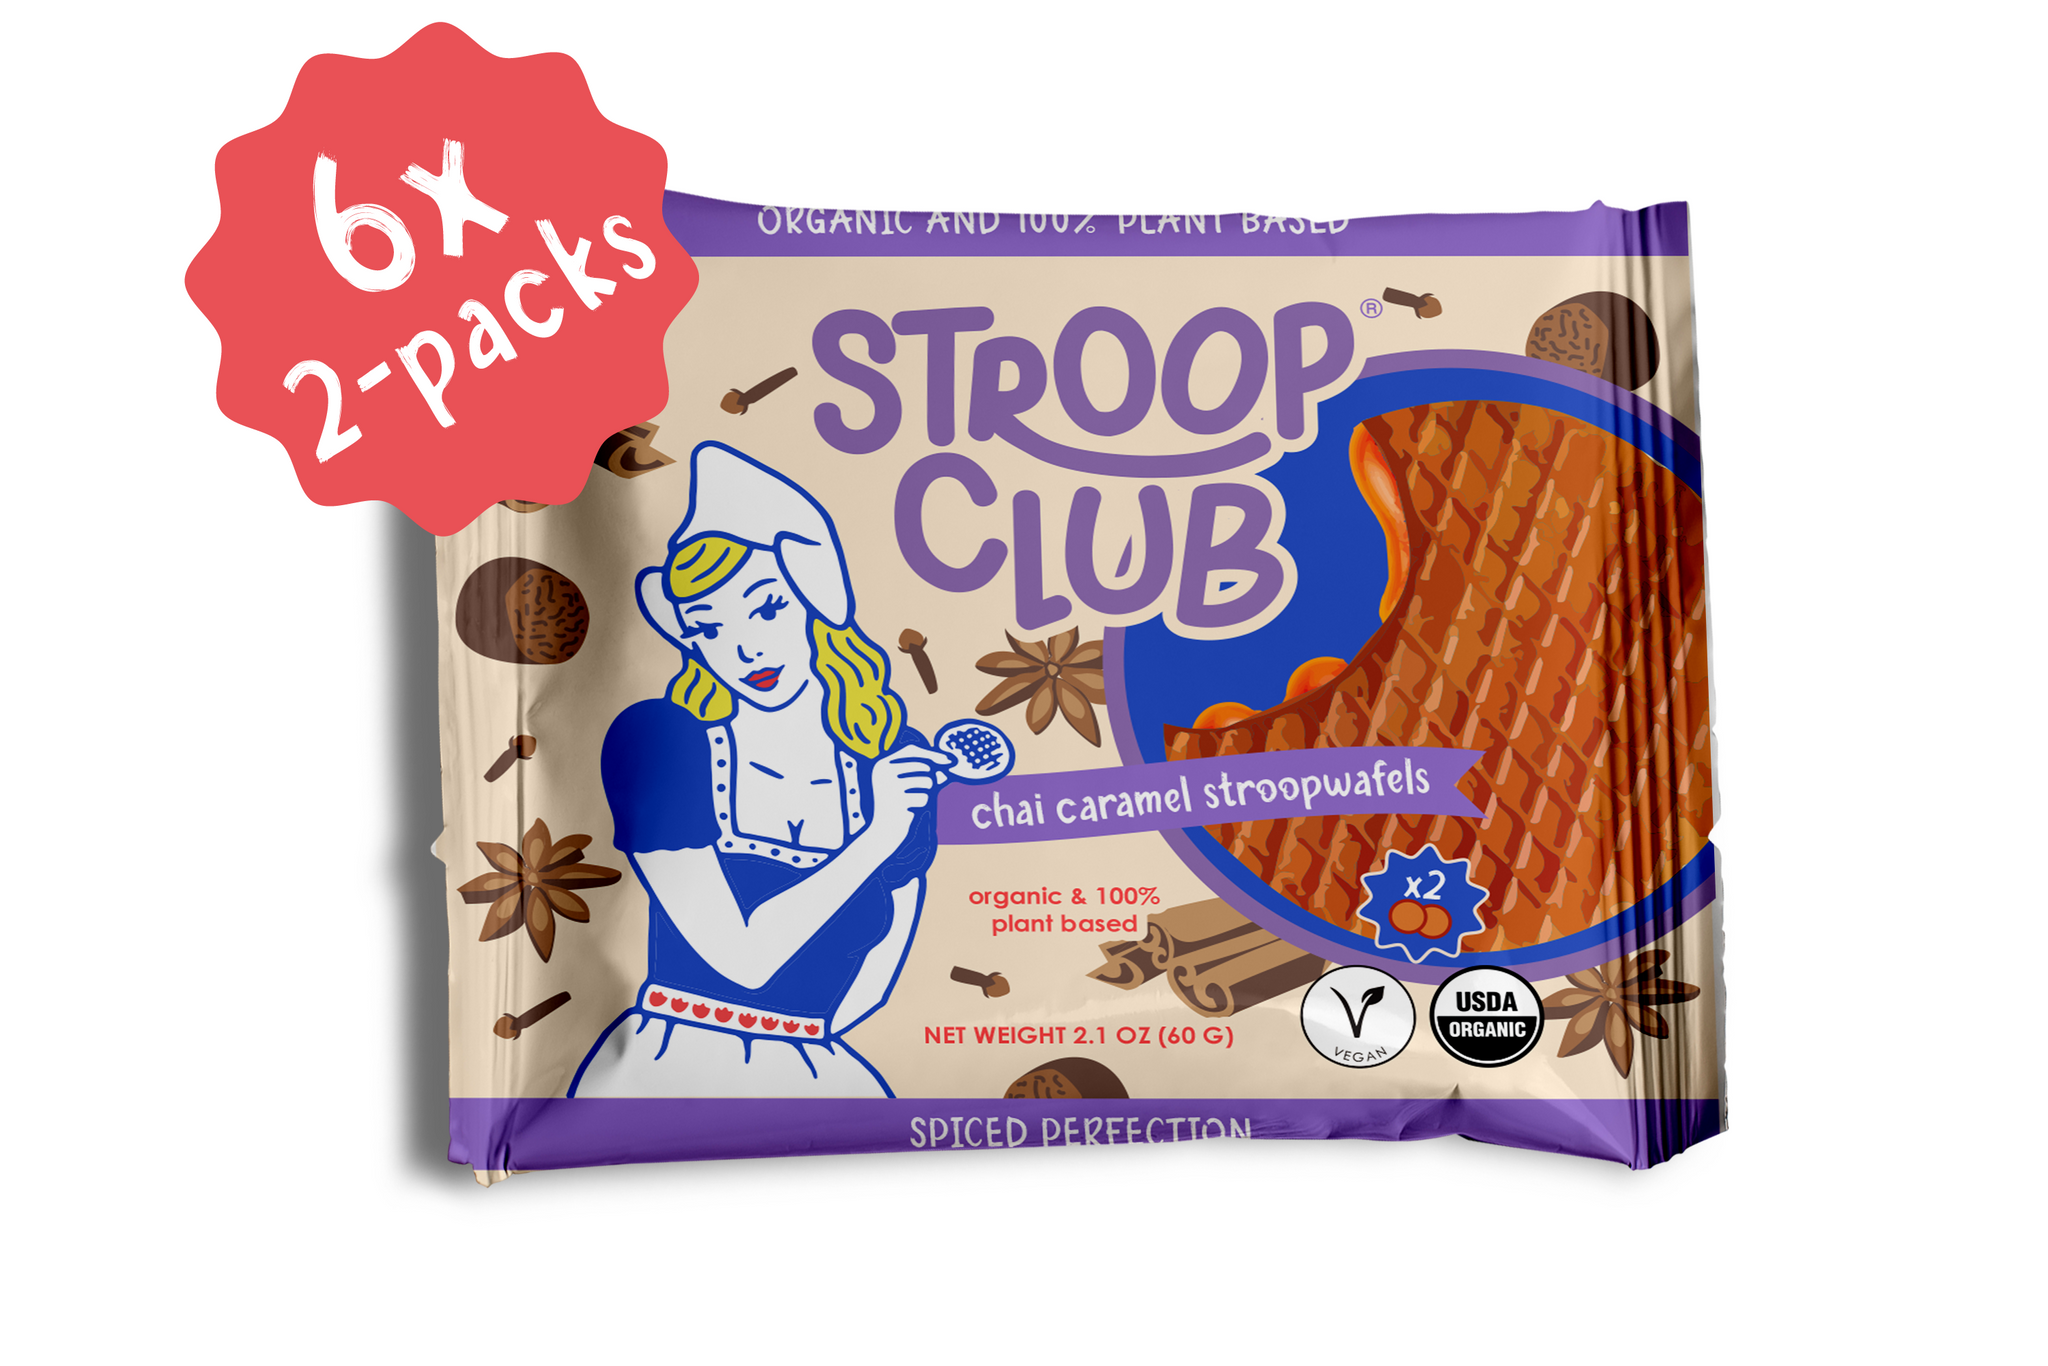 Chai Caramel Plant Based and Organic Stroopwafels (6x 2-pack - 12 total)